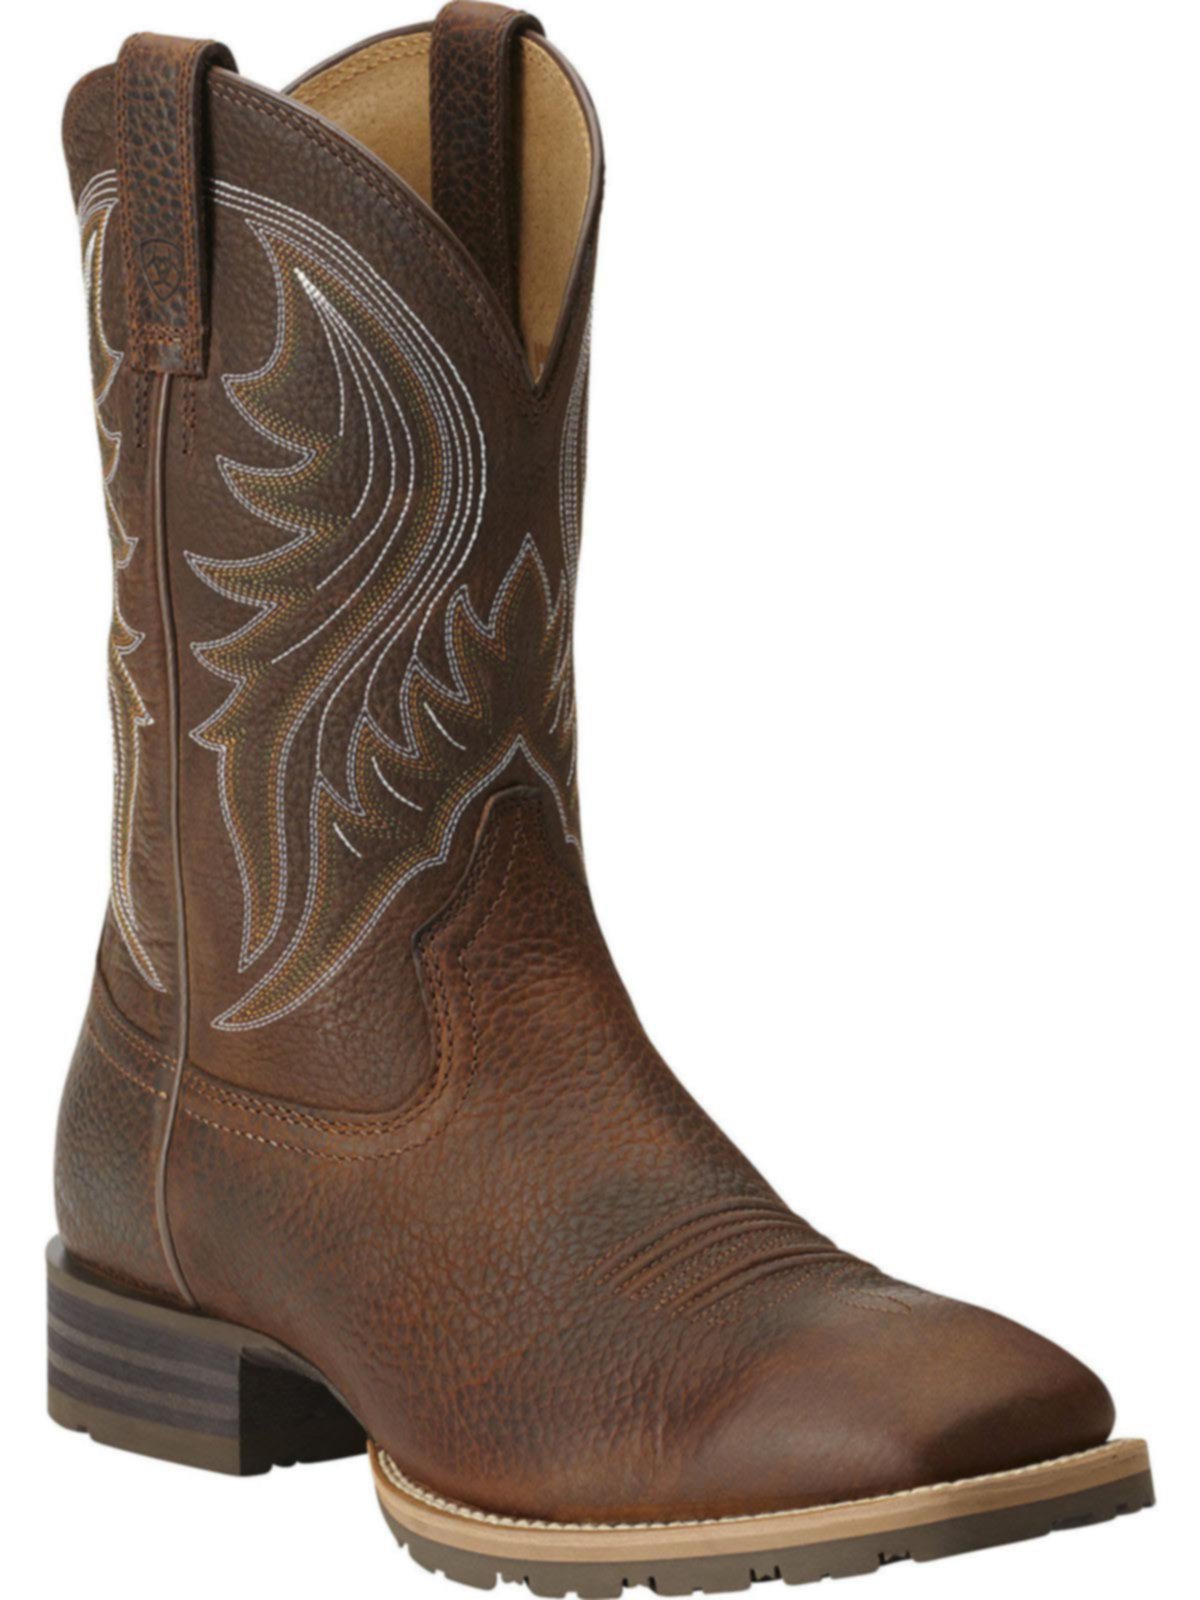 Shop Ariat Mens Hybrid Rancher Western Boot 10014070 | Save 20% + Free ...